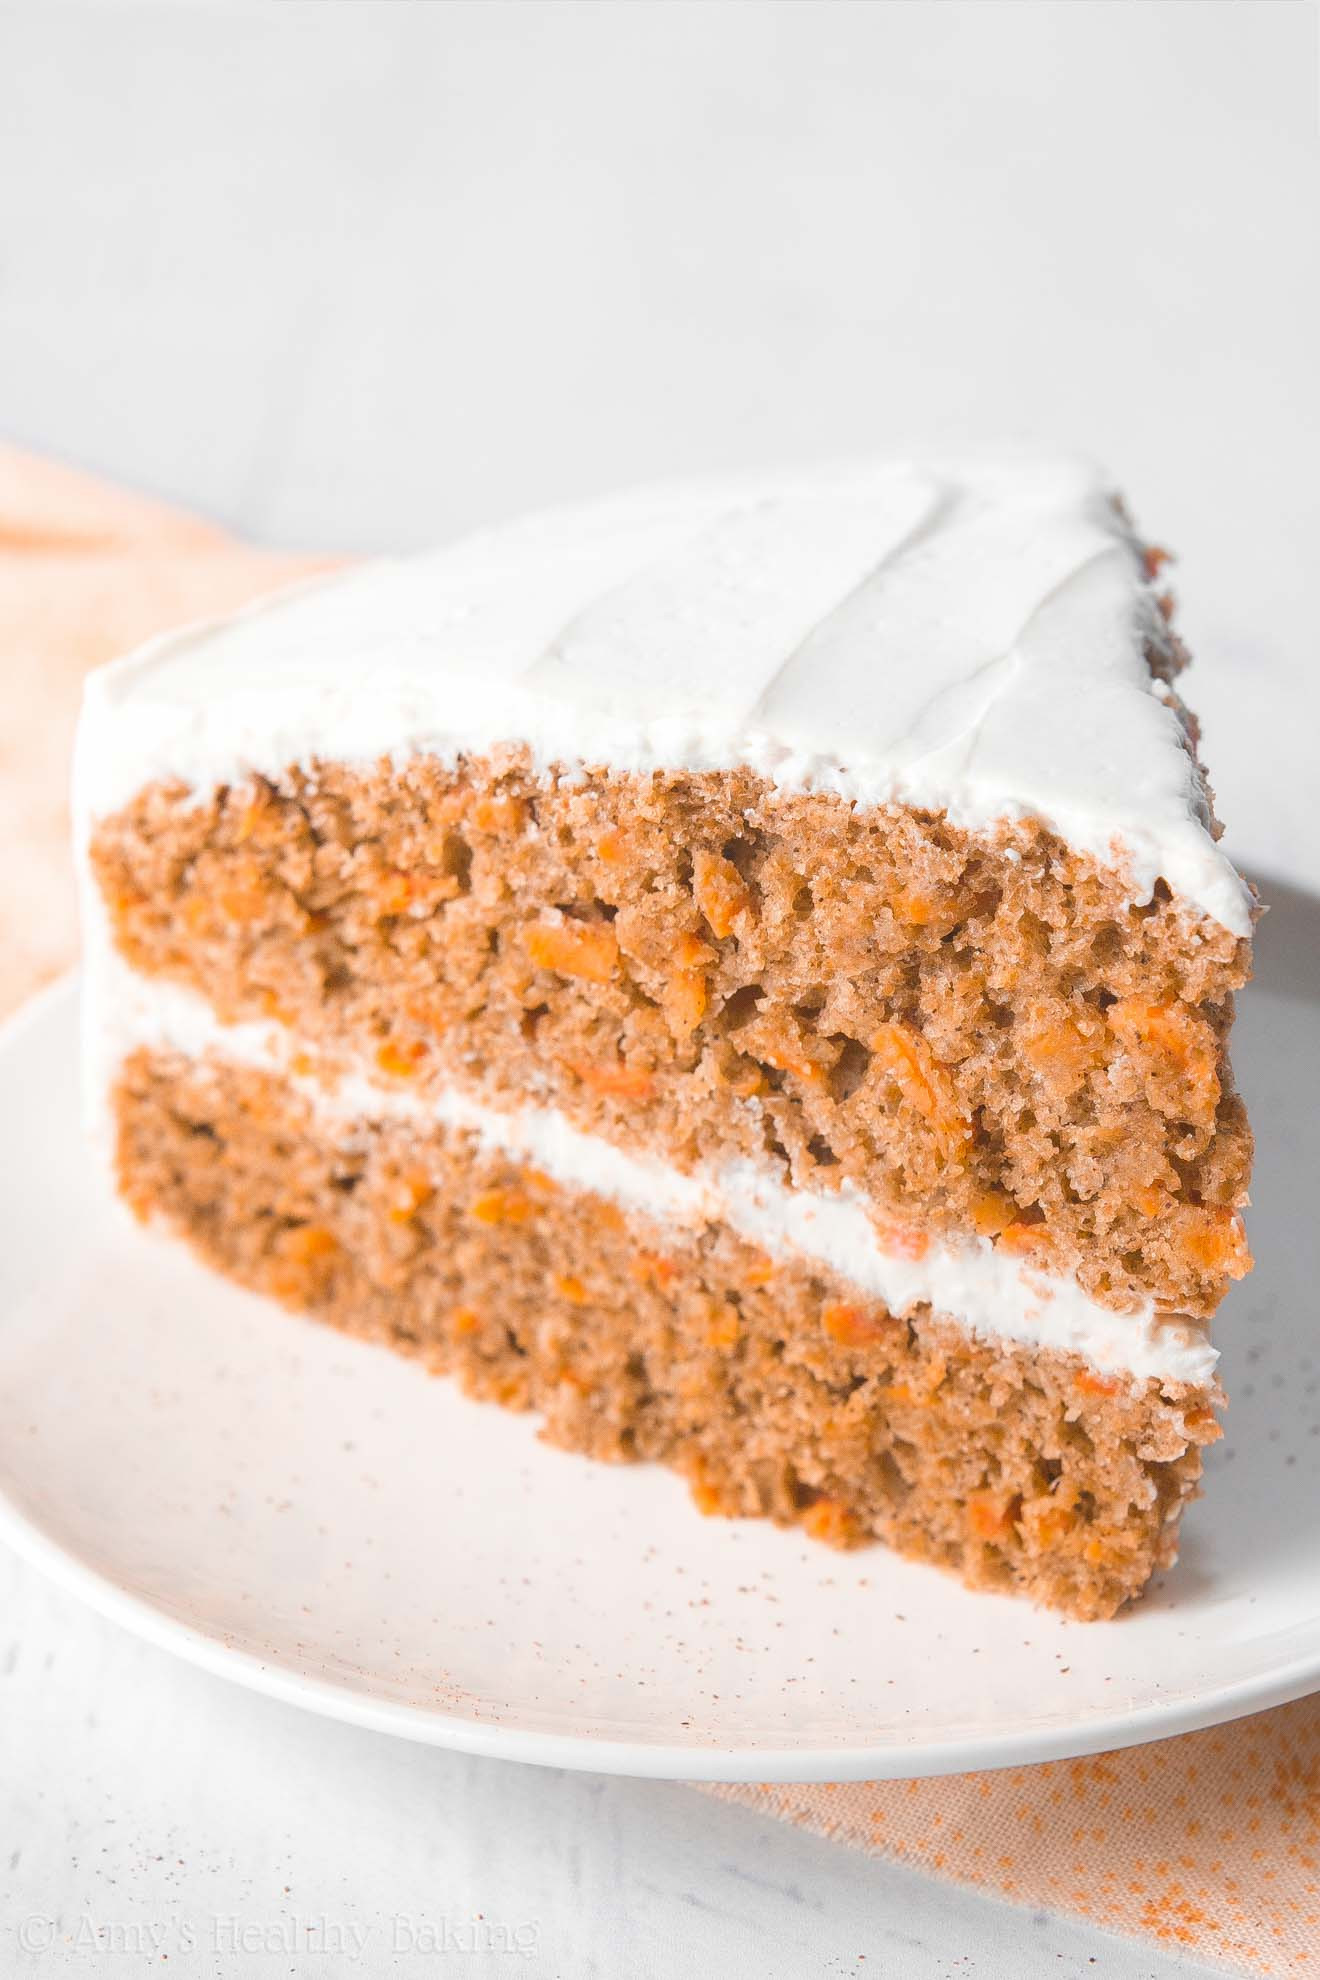 Carrot Cake Recipe Healthy
 The Ultimate Healthy Carrot Cake